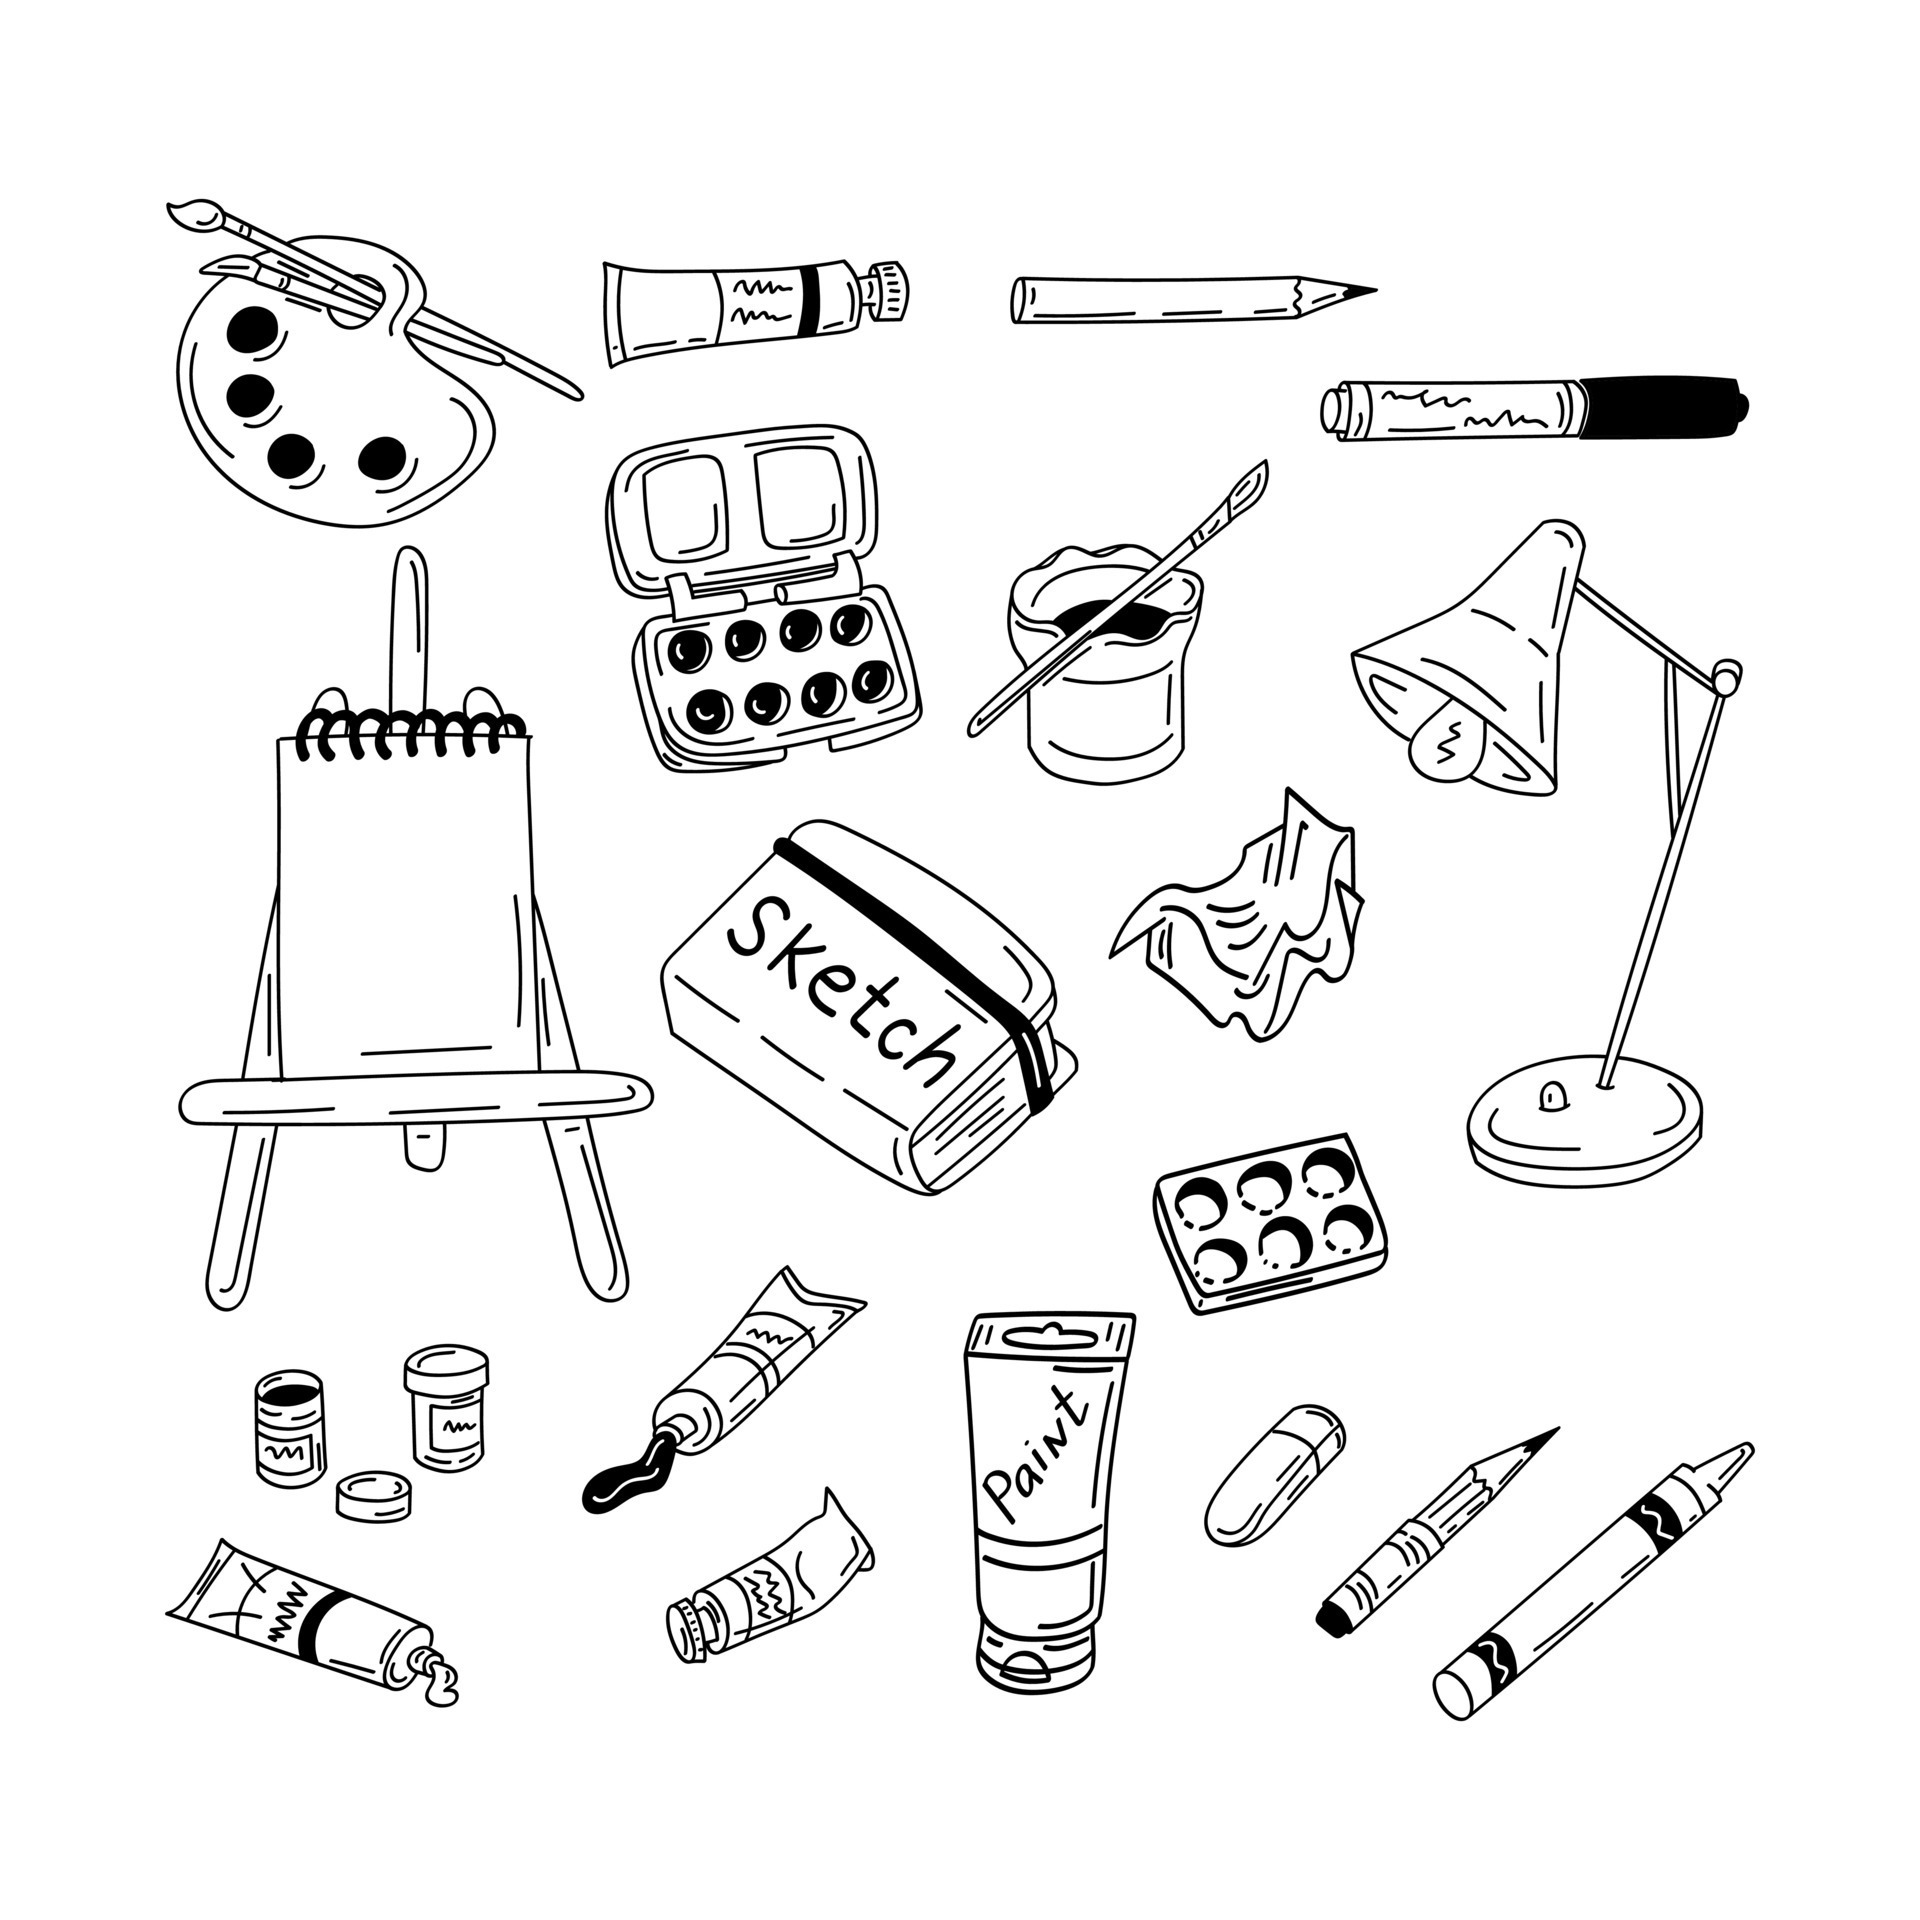 https://static.vecteezy.com/system/resources/previews/026/340/118/original/set-of-hand-drawn-doodle-cute-artist-things-isolated-outline-elements-onn-white-background-brushes-pencils-paints-sketchbook-sketch-design-perfect-for-coloring-pages-stickers-tatoo-vector.jpg